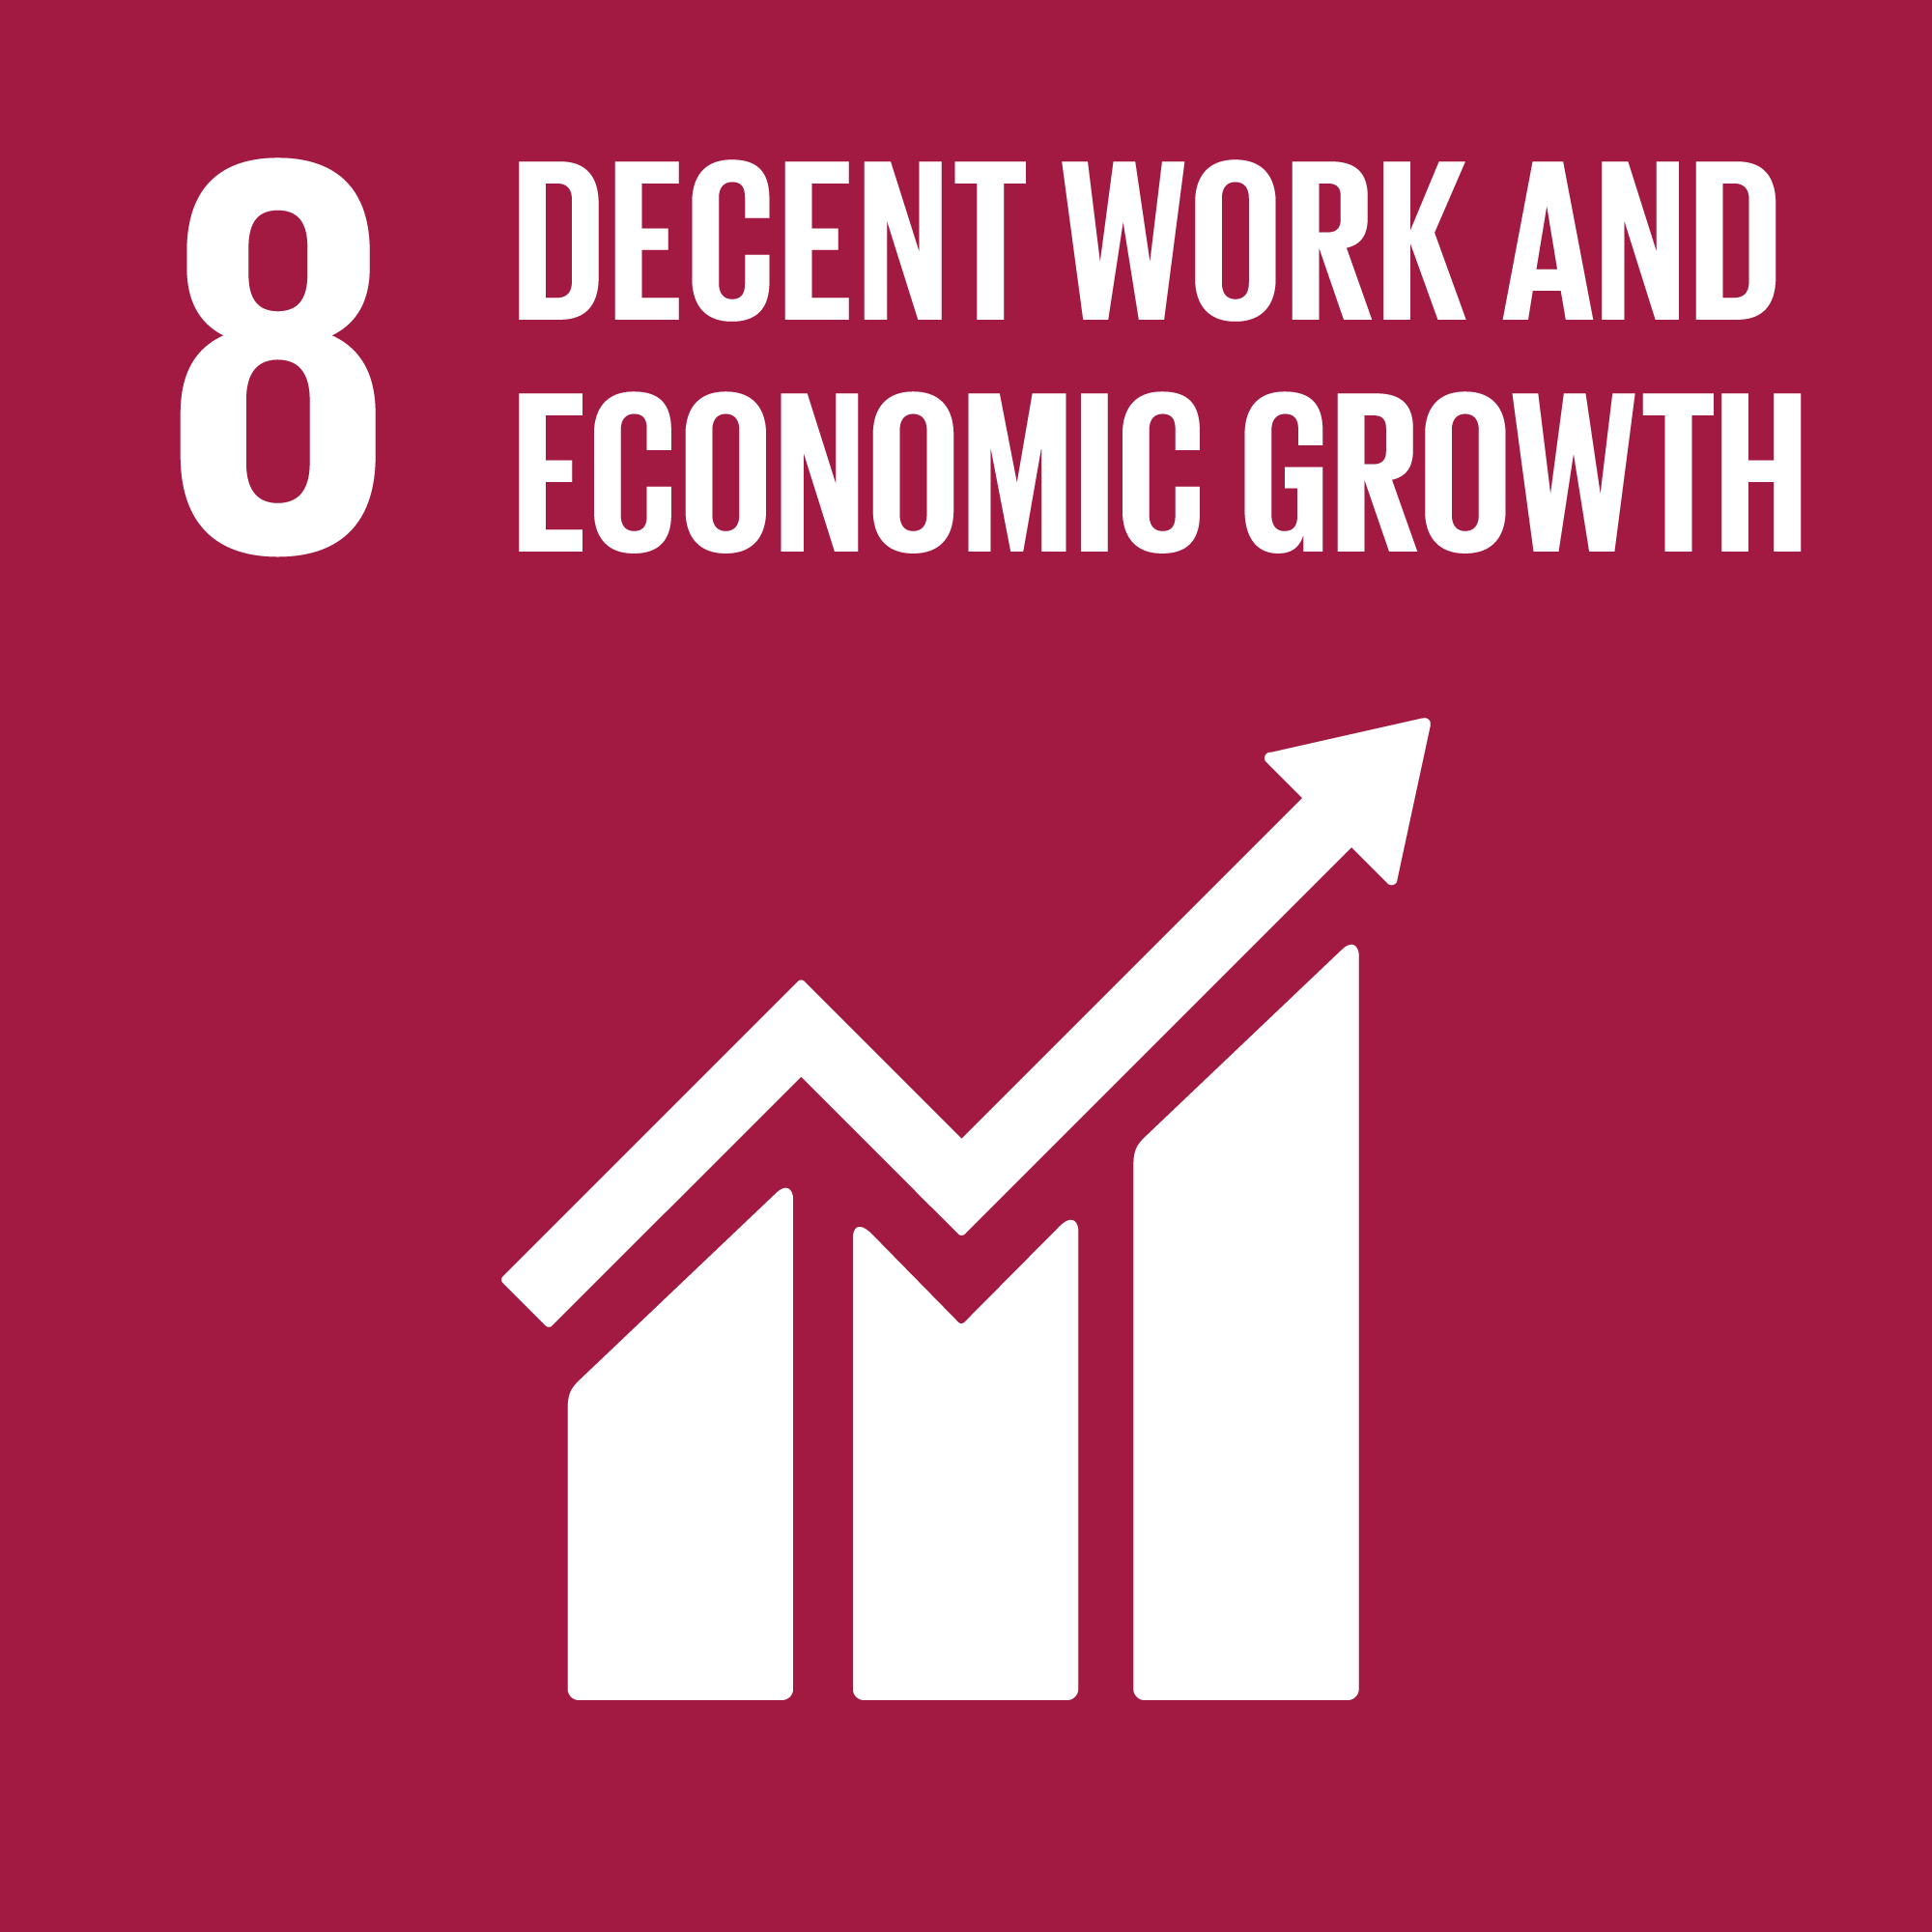 Goal 8: Decent Work and Economic Growth - Promote sustained, inclusive and sustainable economic growth, full and productive employment and decent work for all